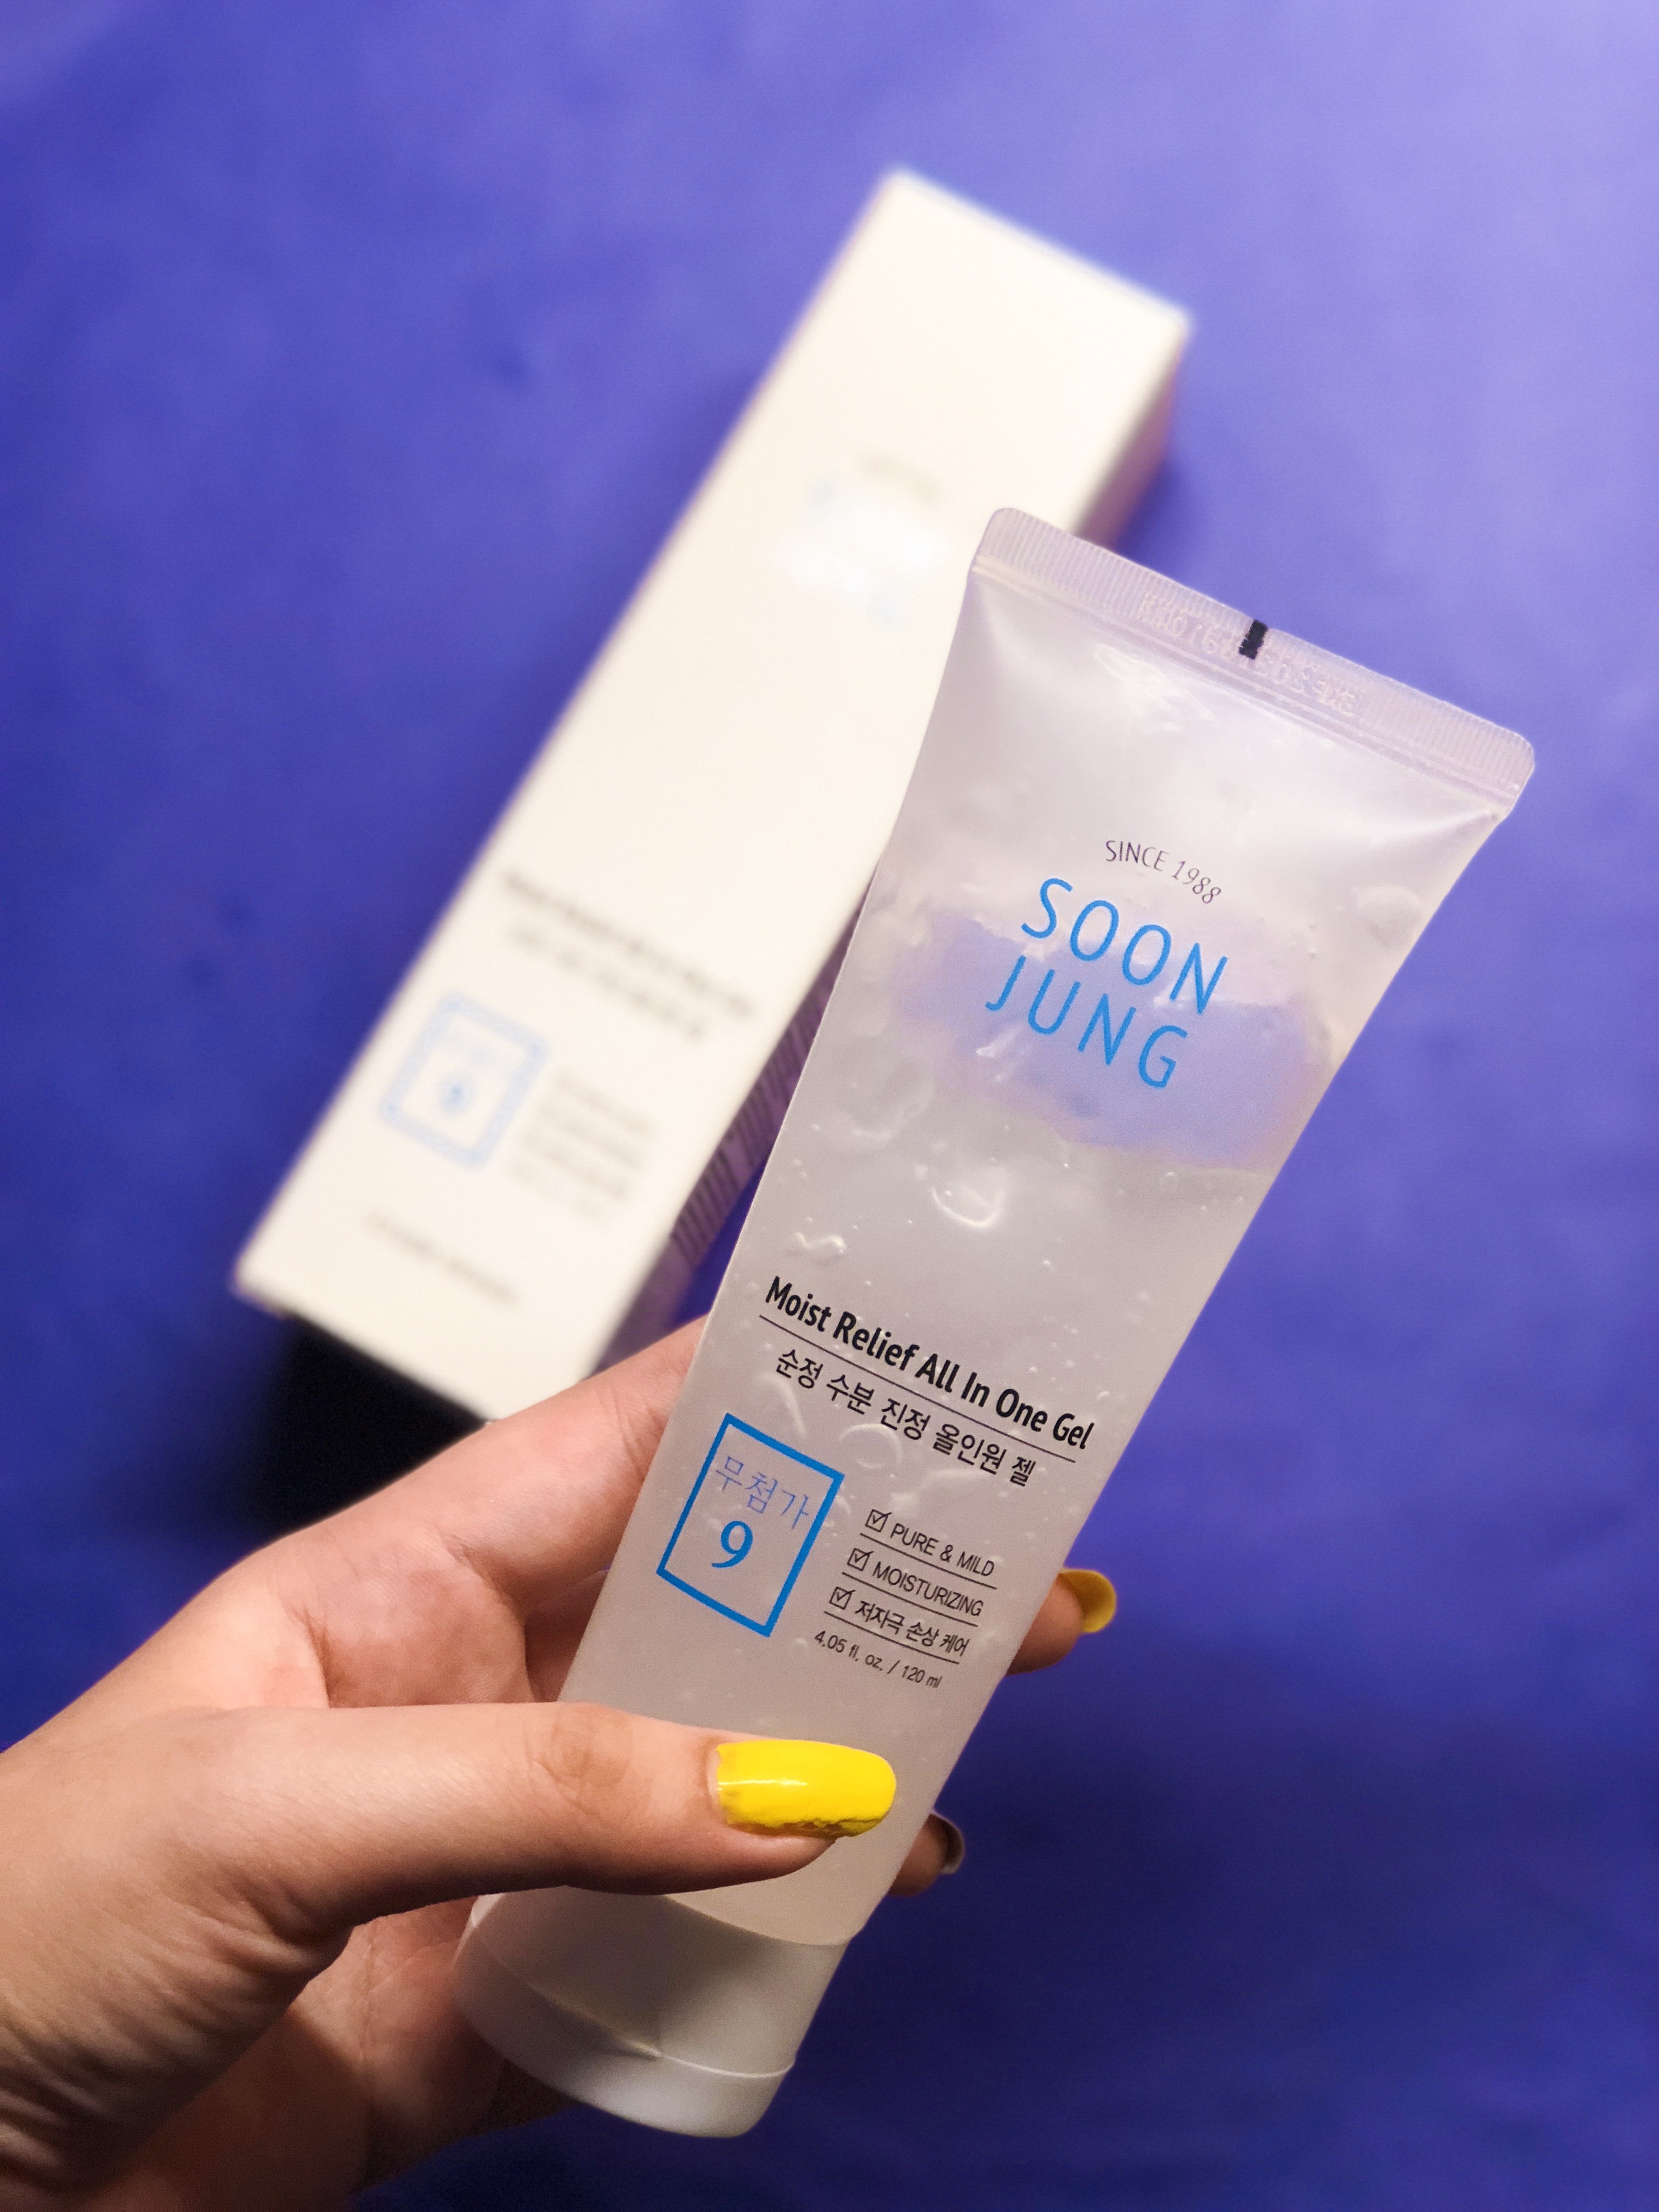 Etude House Soon Jung Moist Relief All-In-One Gel Review | Take My